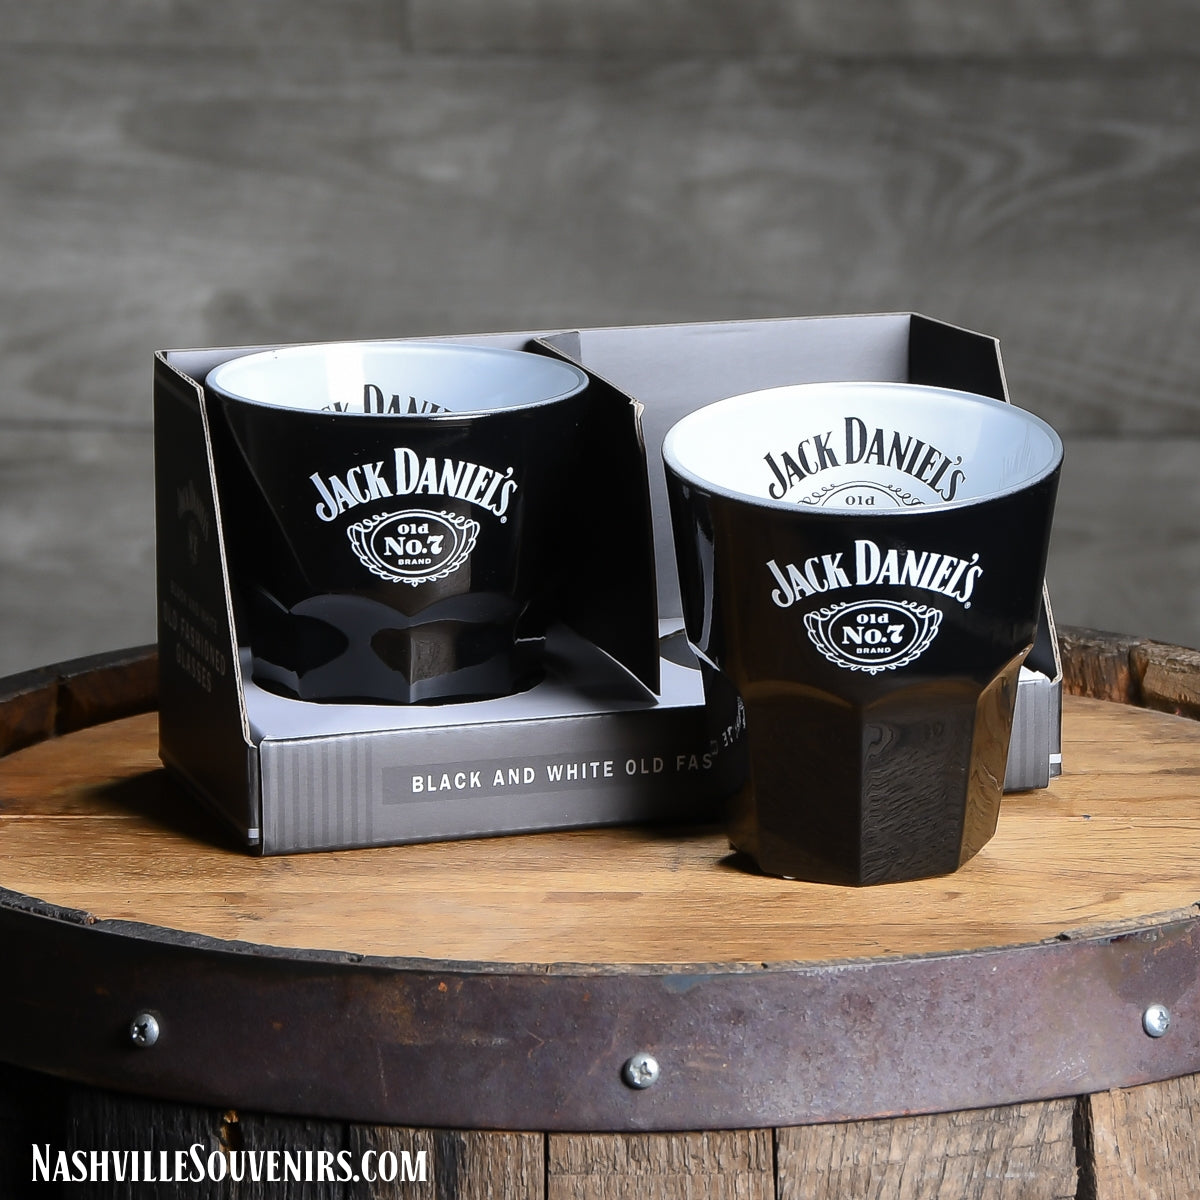 Set of 2 officially licensed Jack Daniels Black and White Double Old Fashioned Glasses. FREE SHIPPING on all US orders over $75!